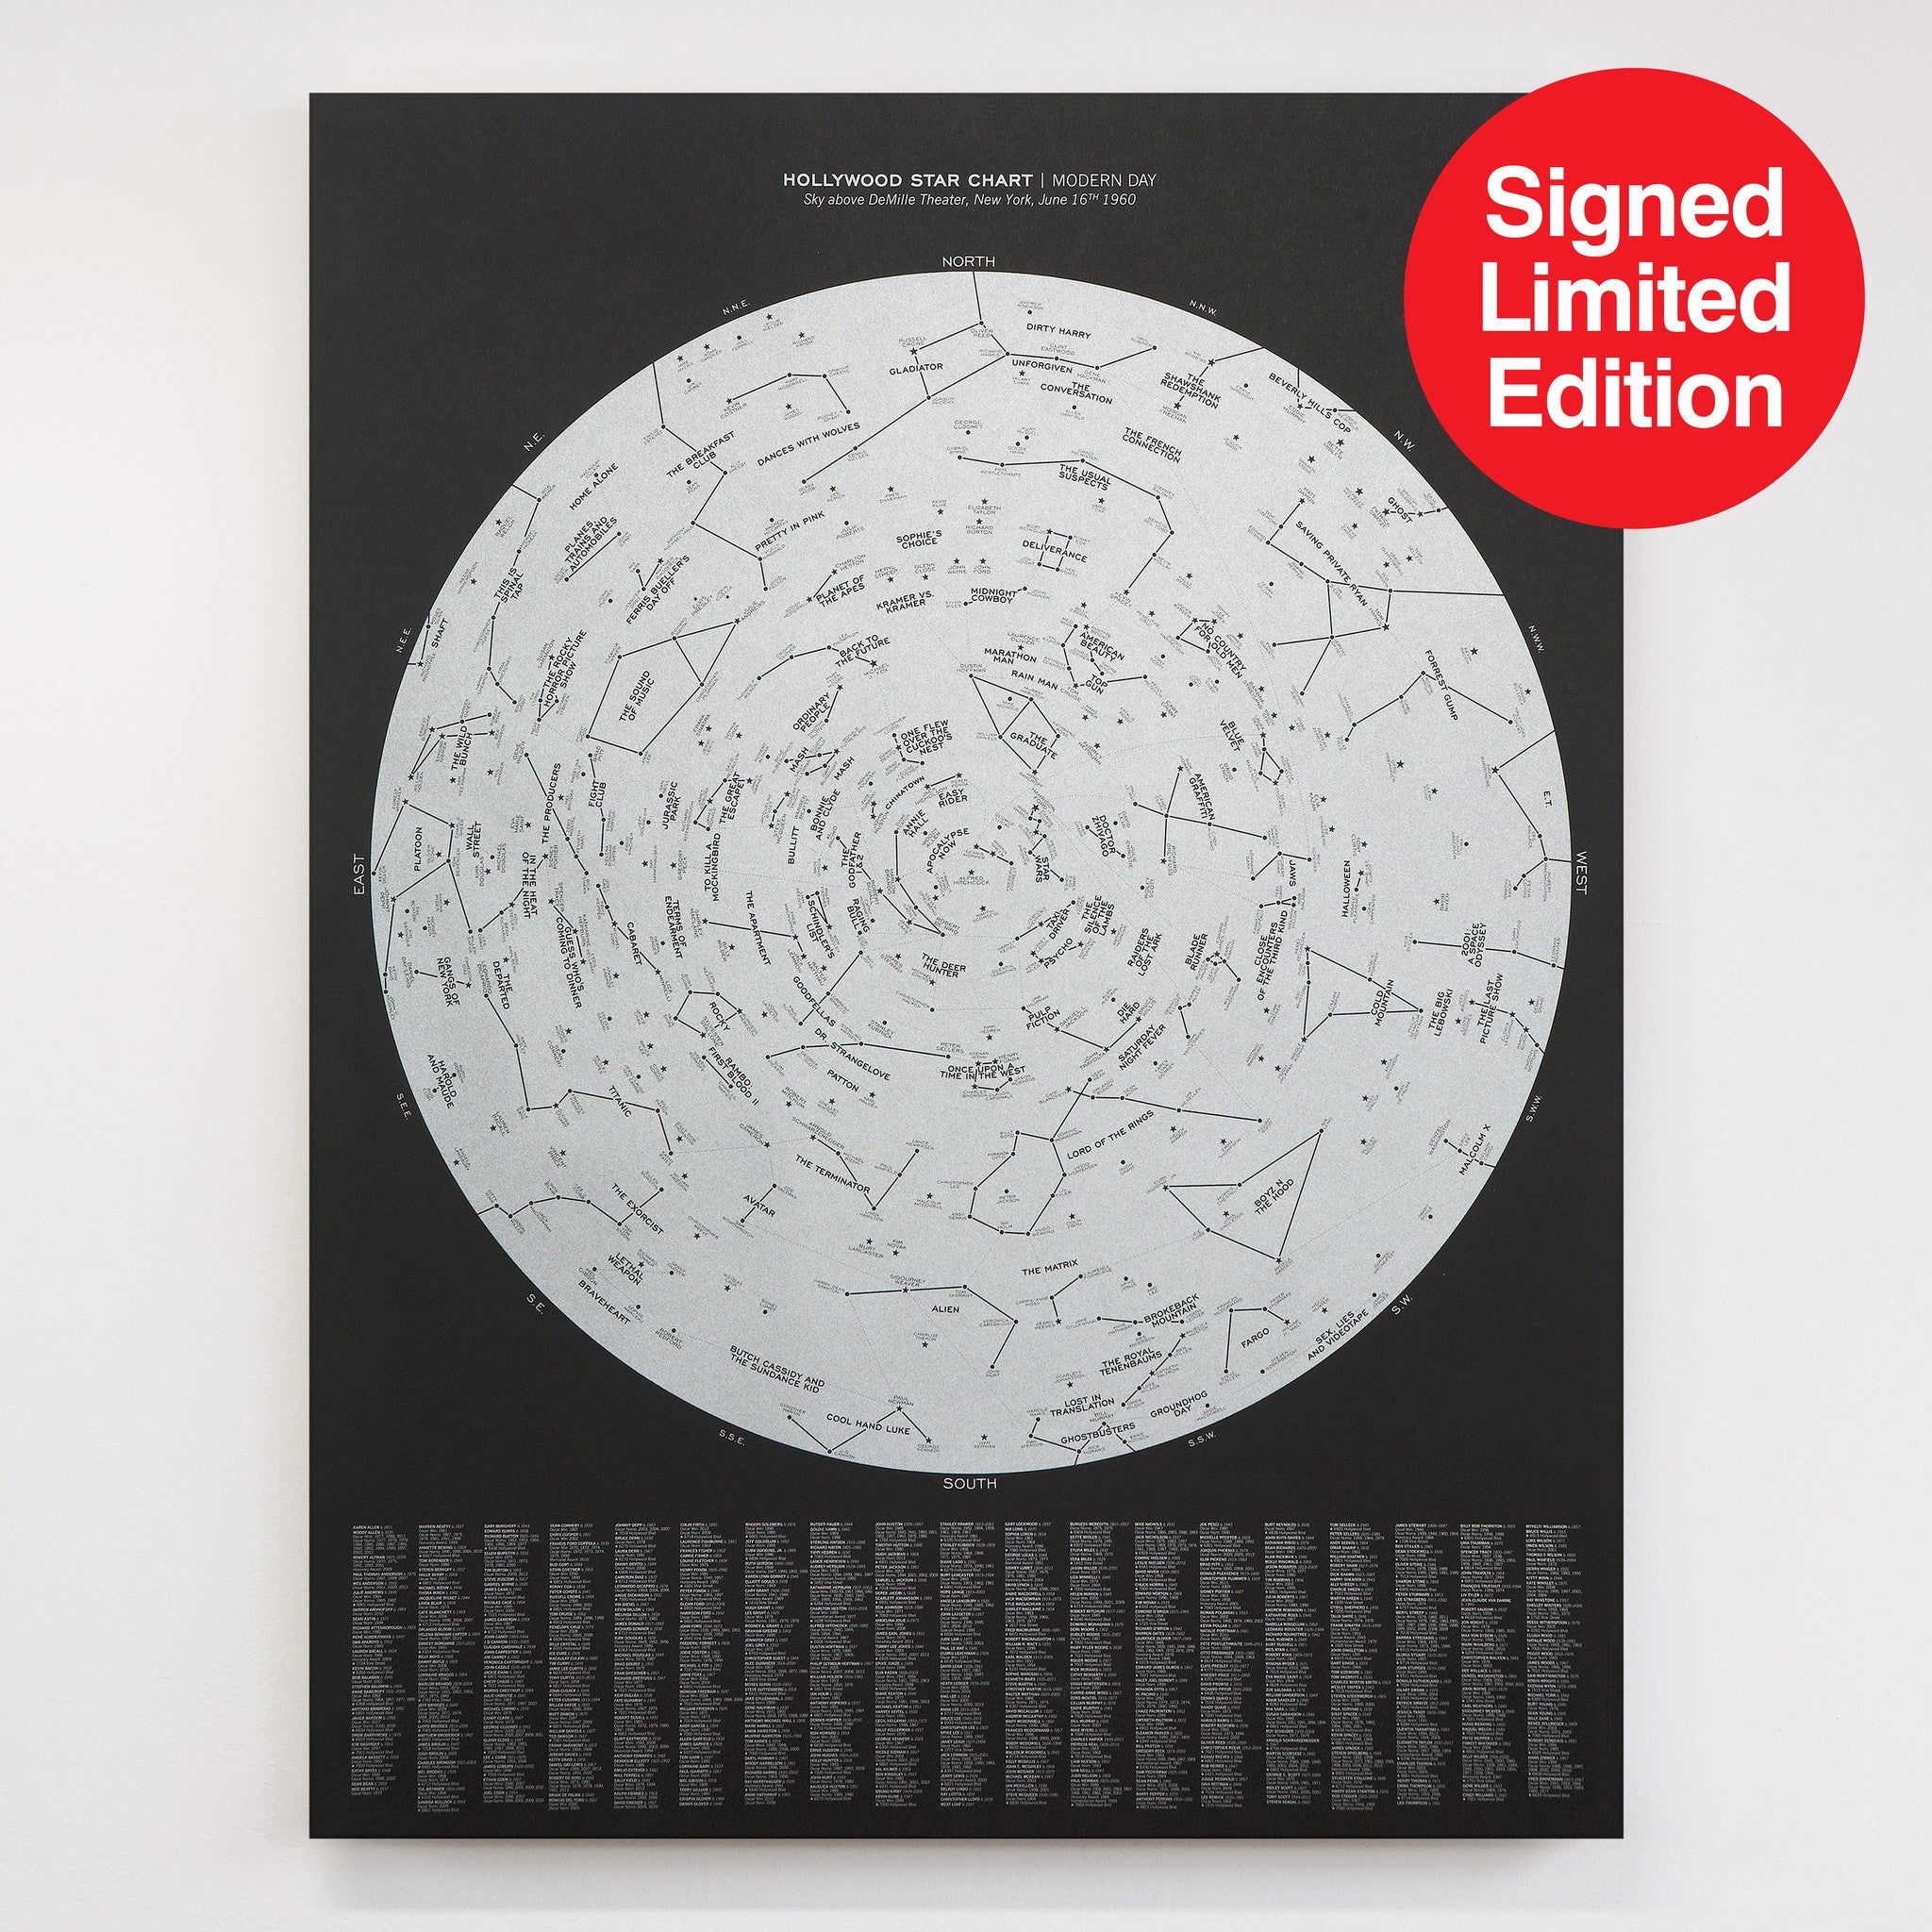 Hollywood Star Chart: Modern Day - Signed Limited Edition